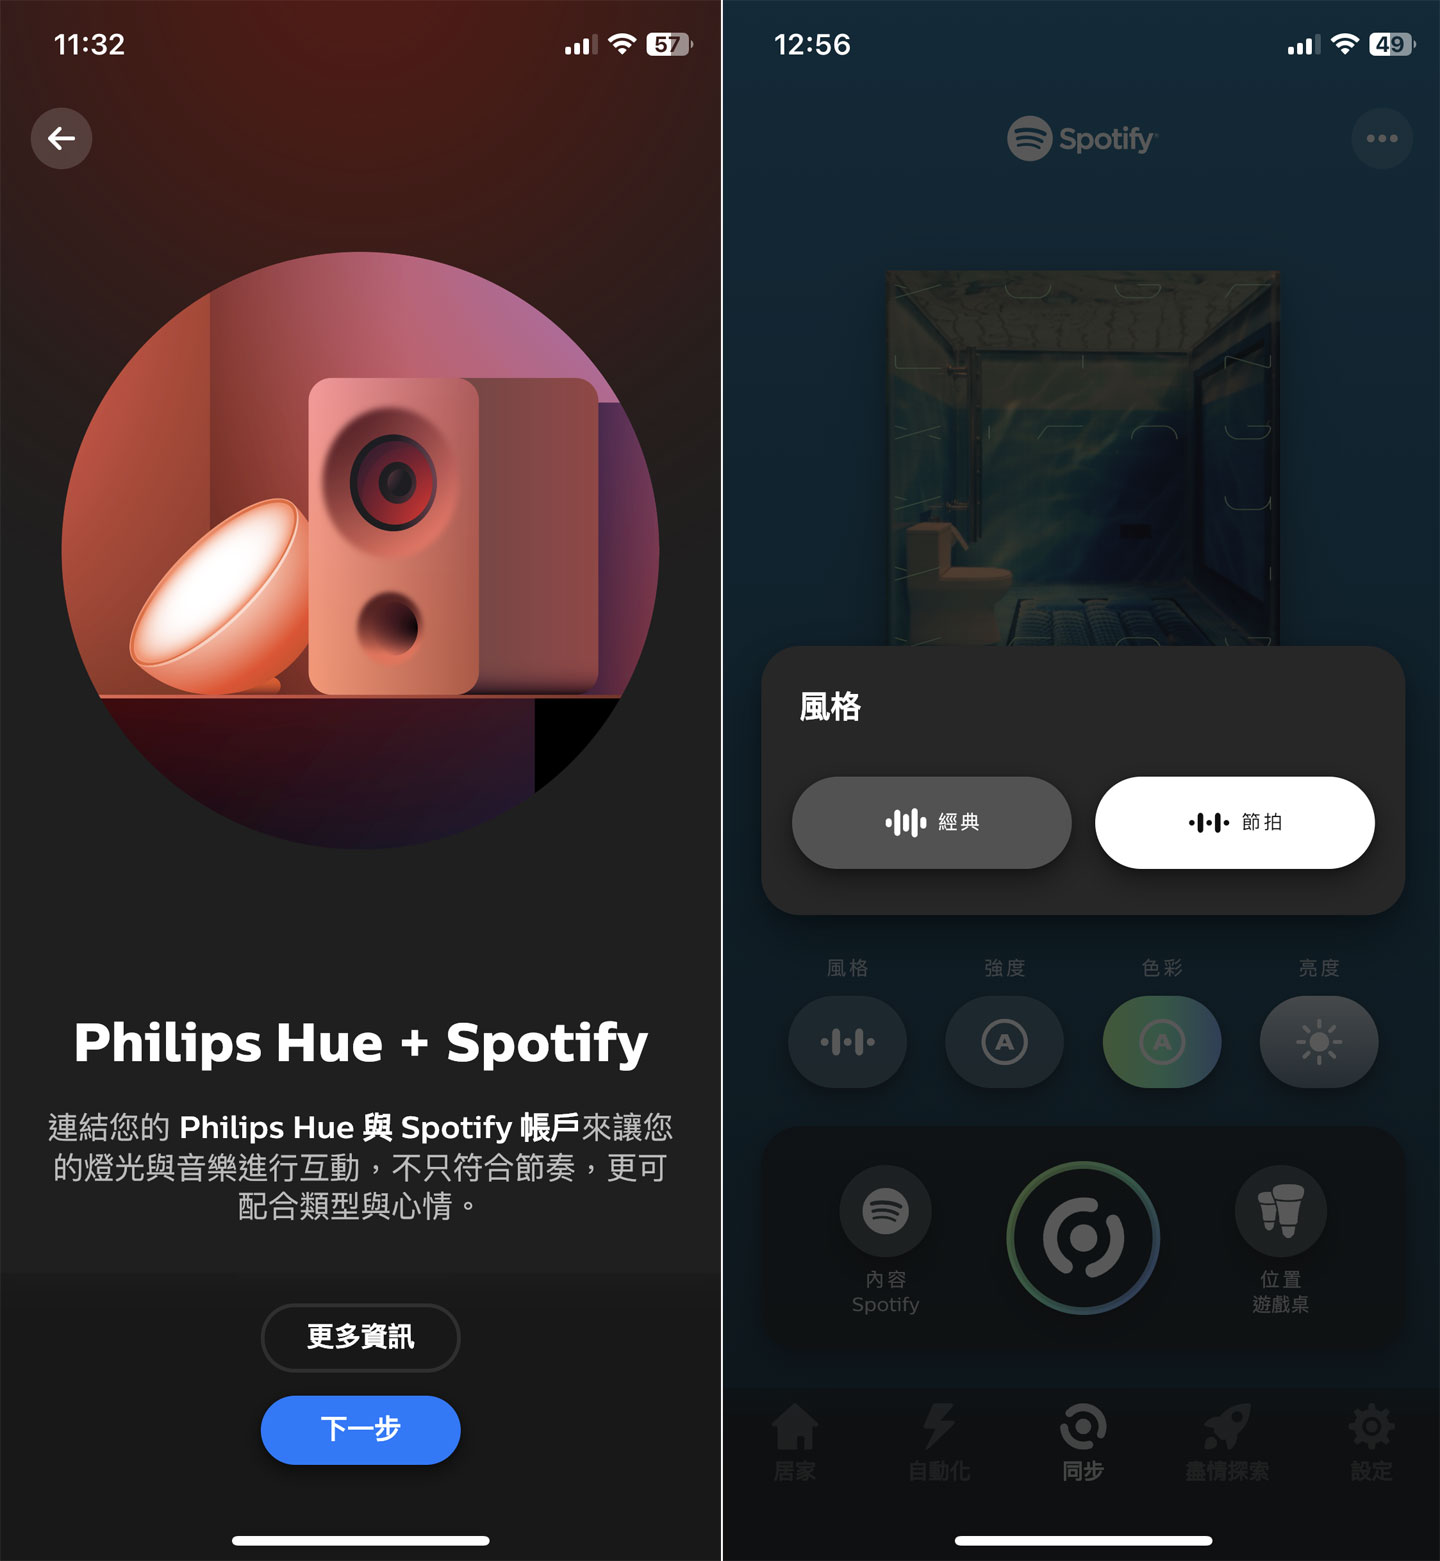 In addition to audio and video synchronization, the Hue app can also be integrated with the Spotify streaming music platform on the mobile phone, and it can also have real-time dynamic lighting effects when playing music.